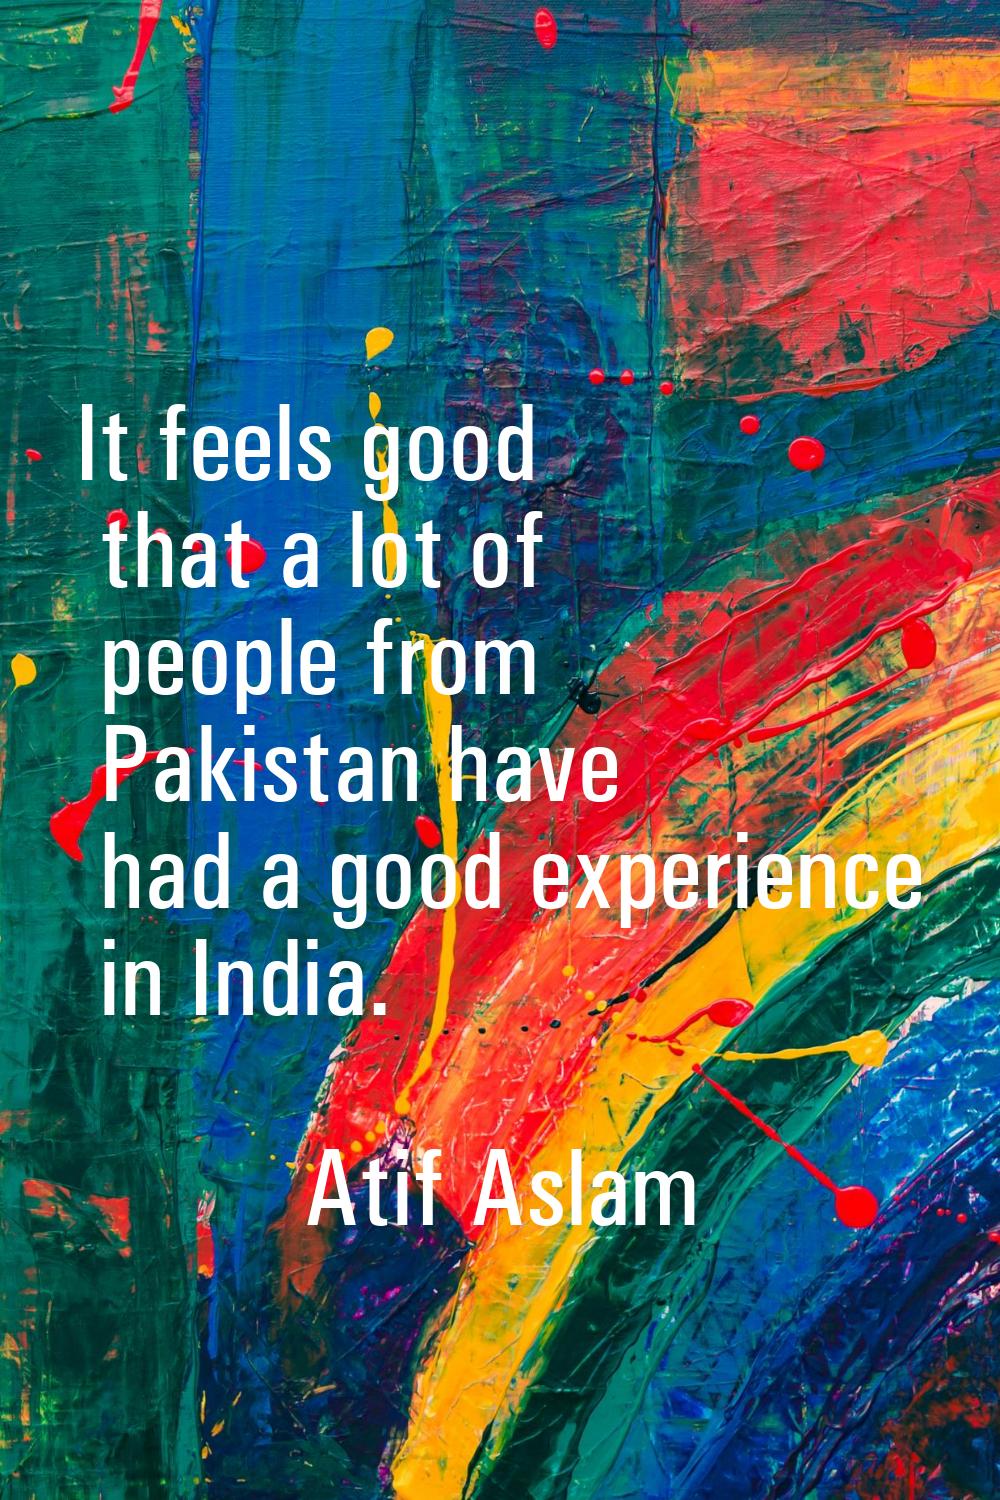 It feels good that a lot of people from Pakistan have had a good experience in India.